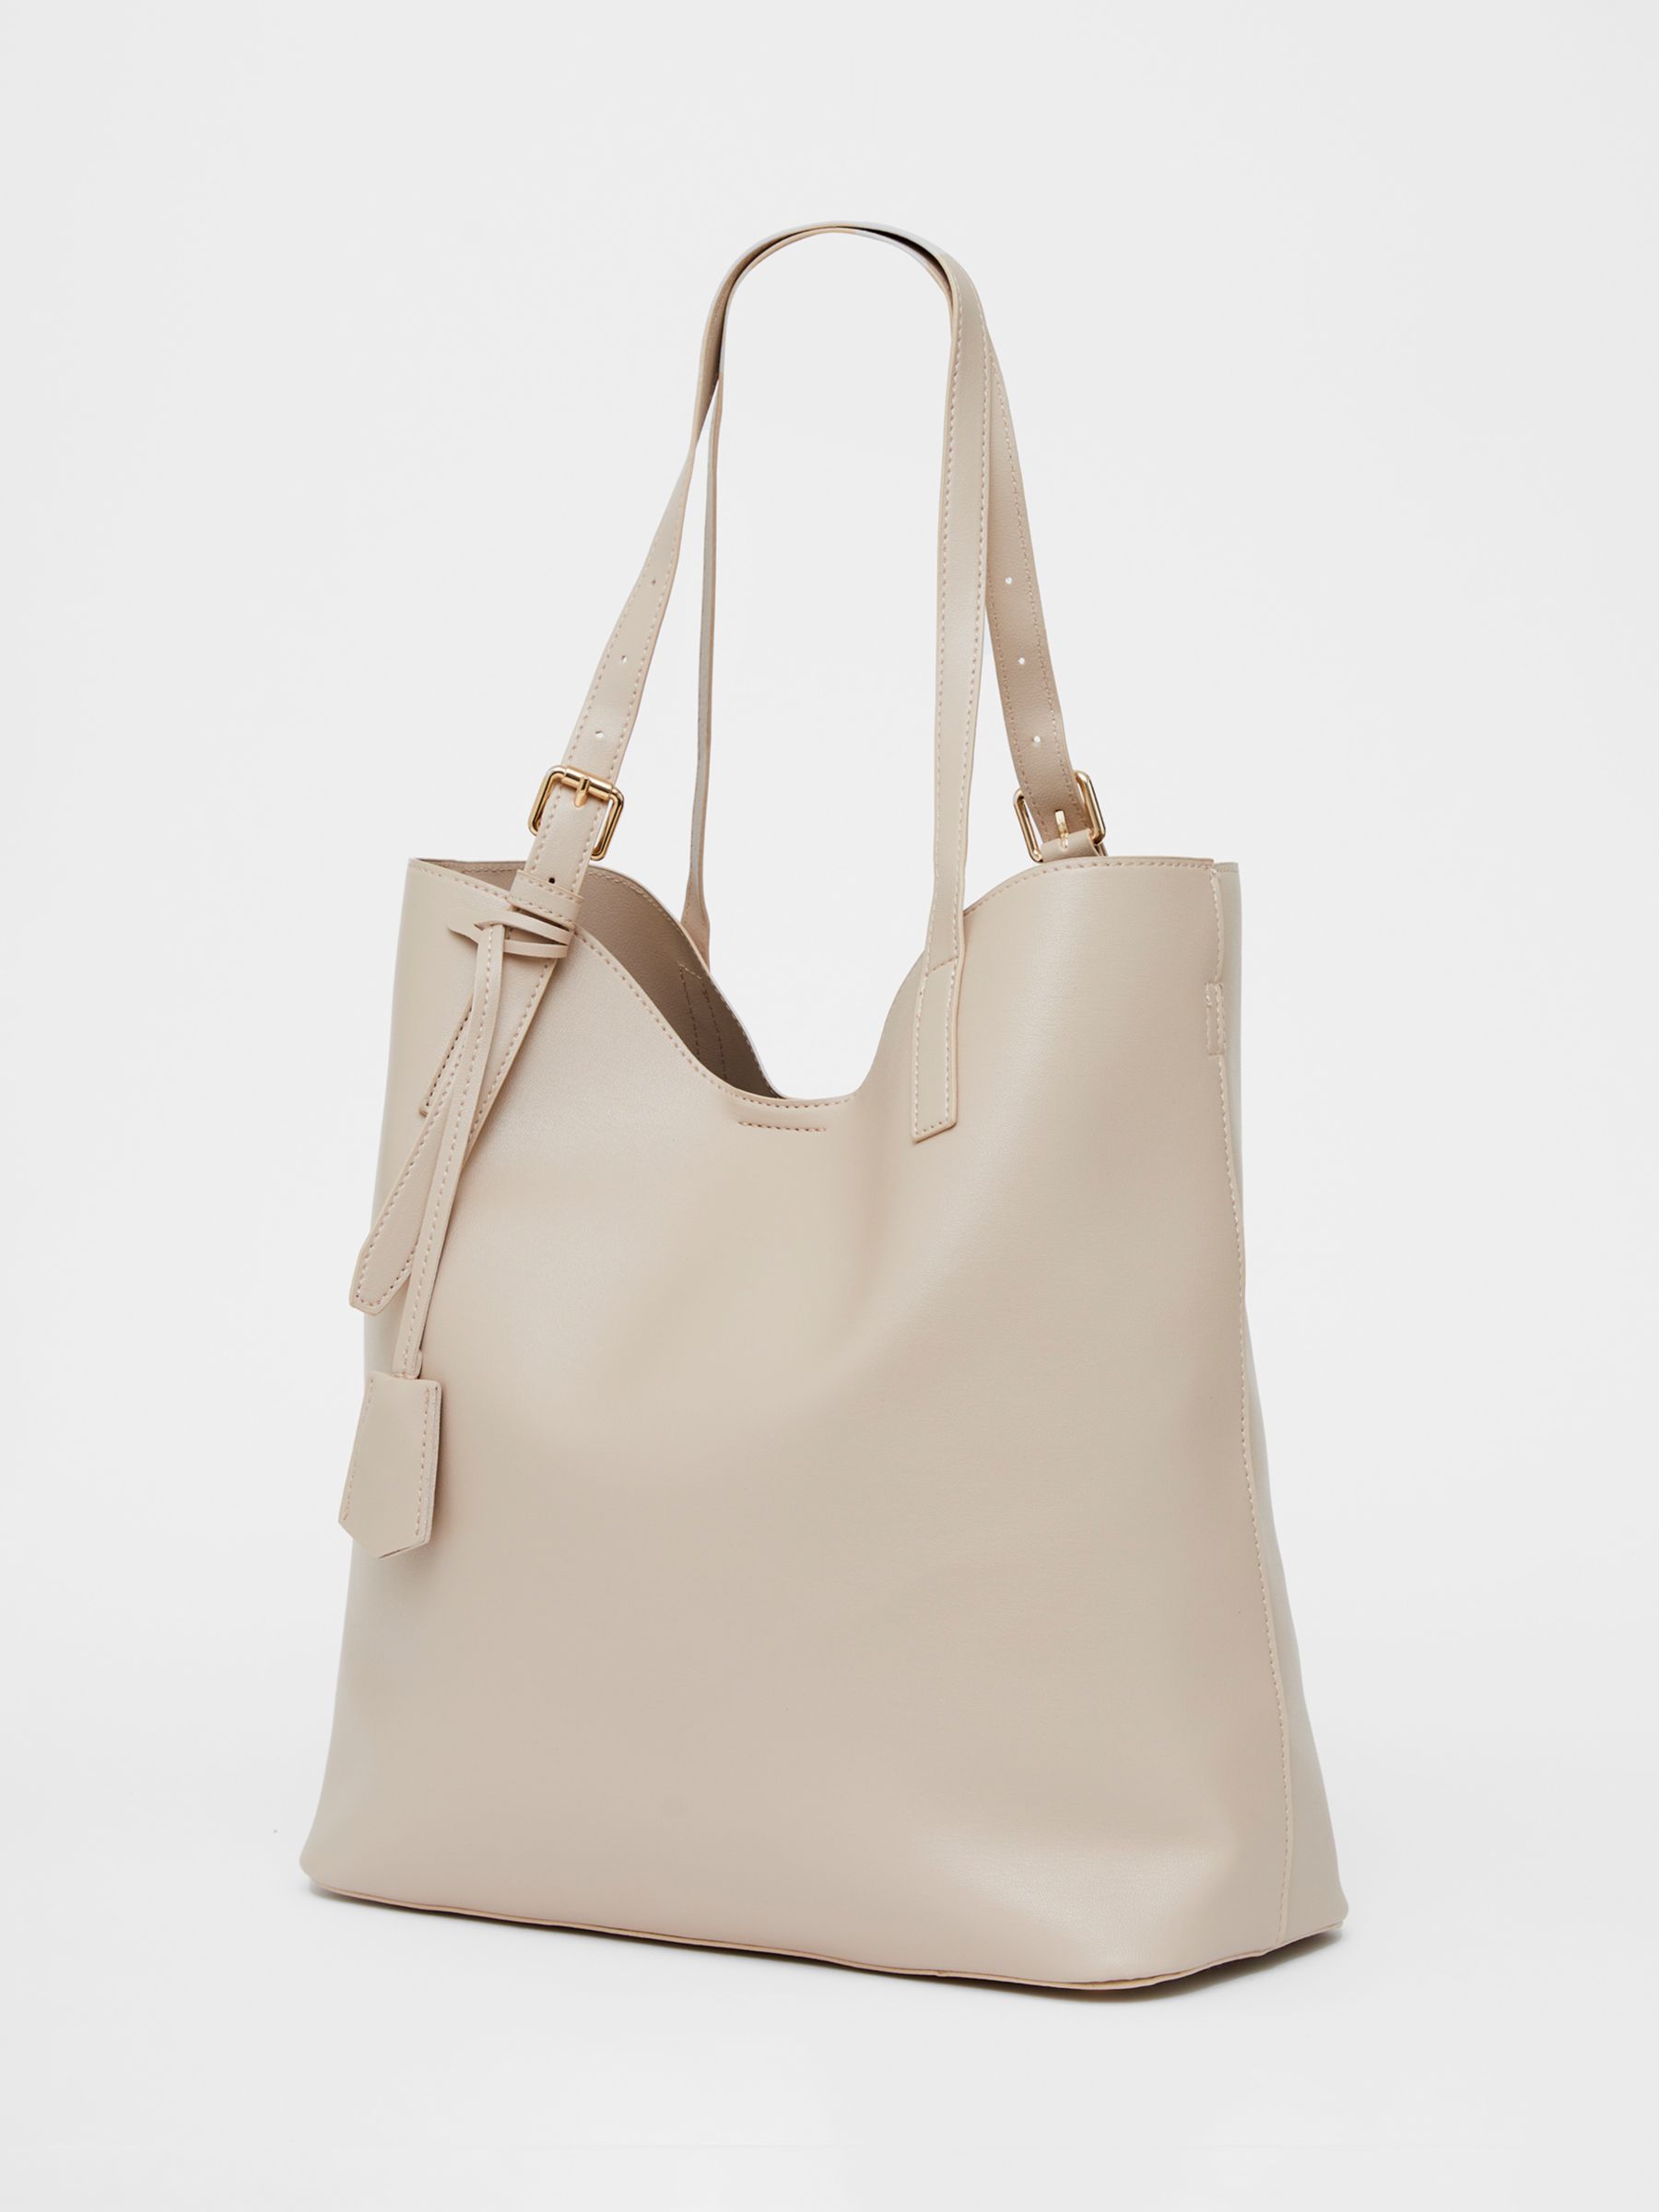 French Tote Bag 